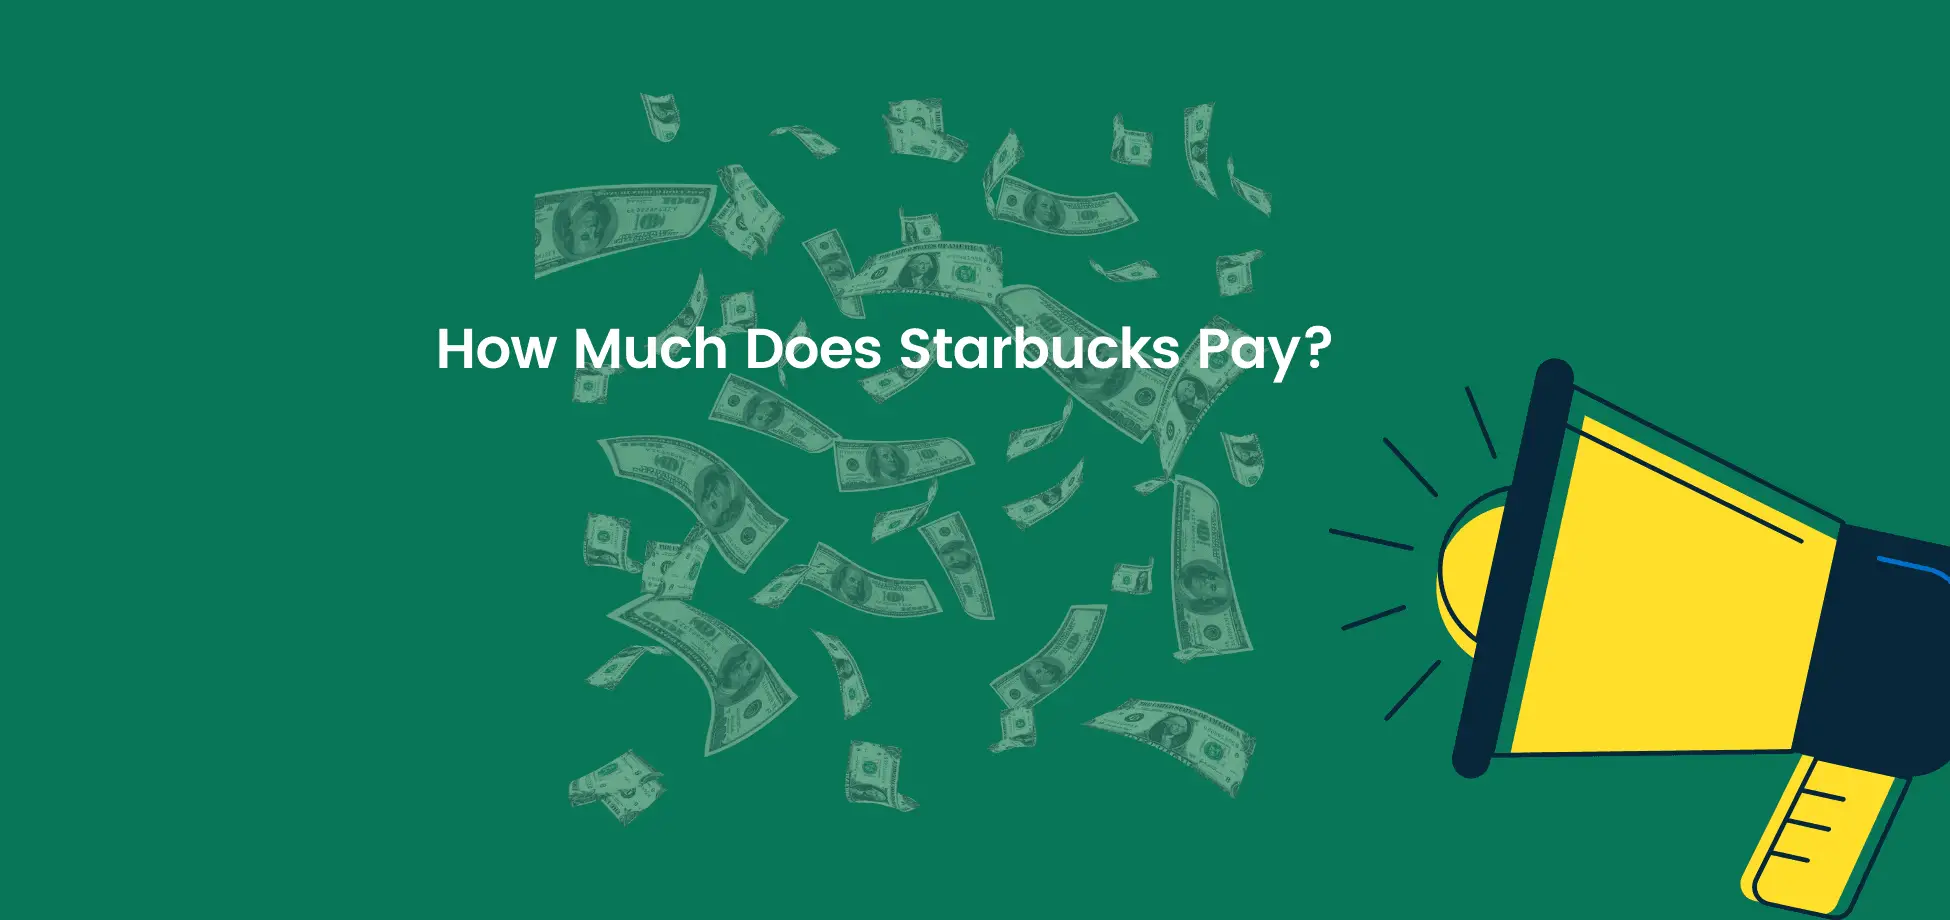 How much does Starbucks pay? Evidently, not enough for now but employees and applicants are holding out hope for better salaries.